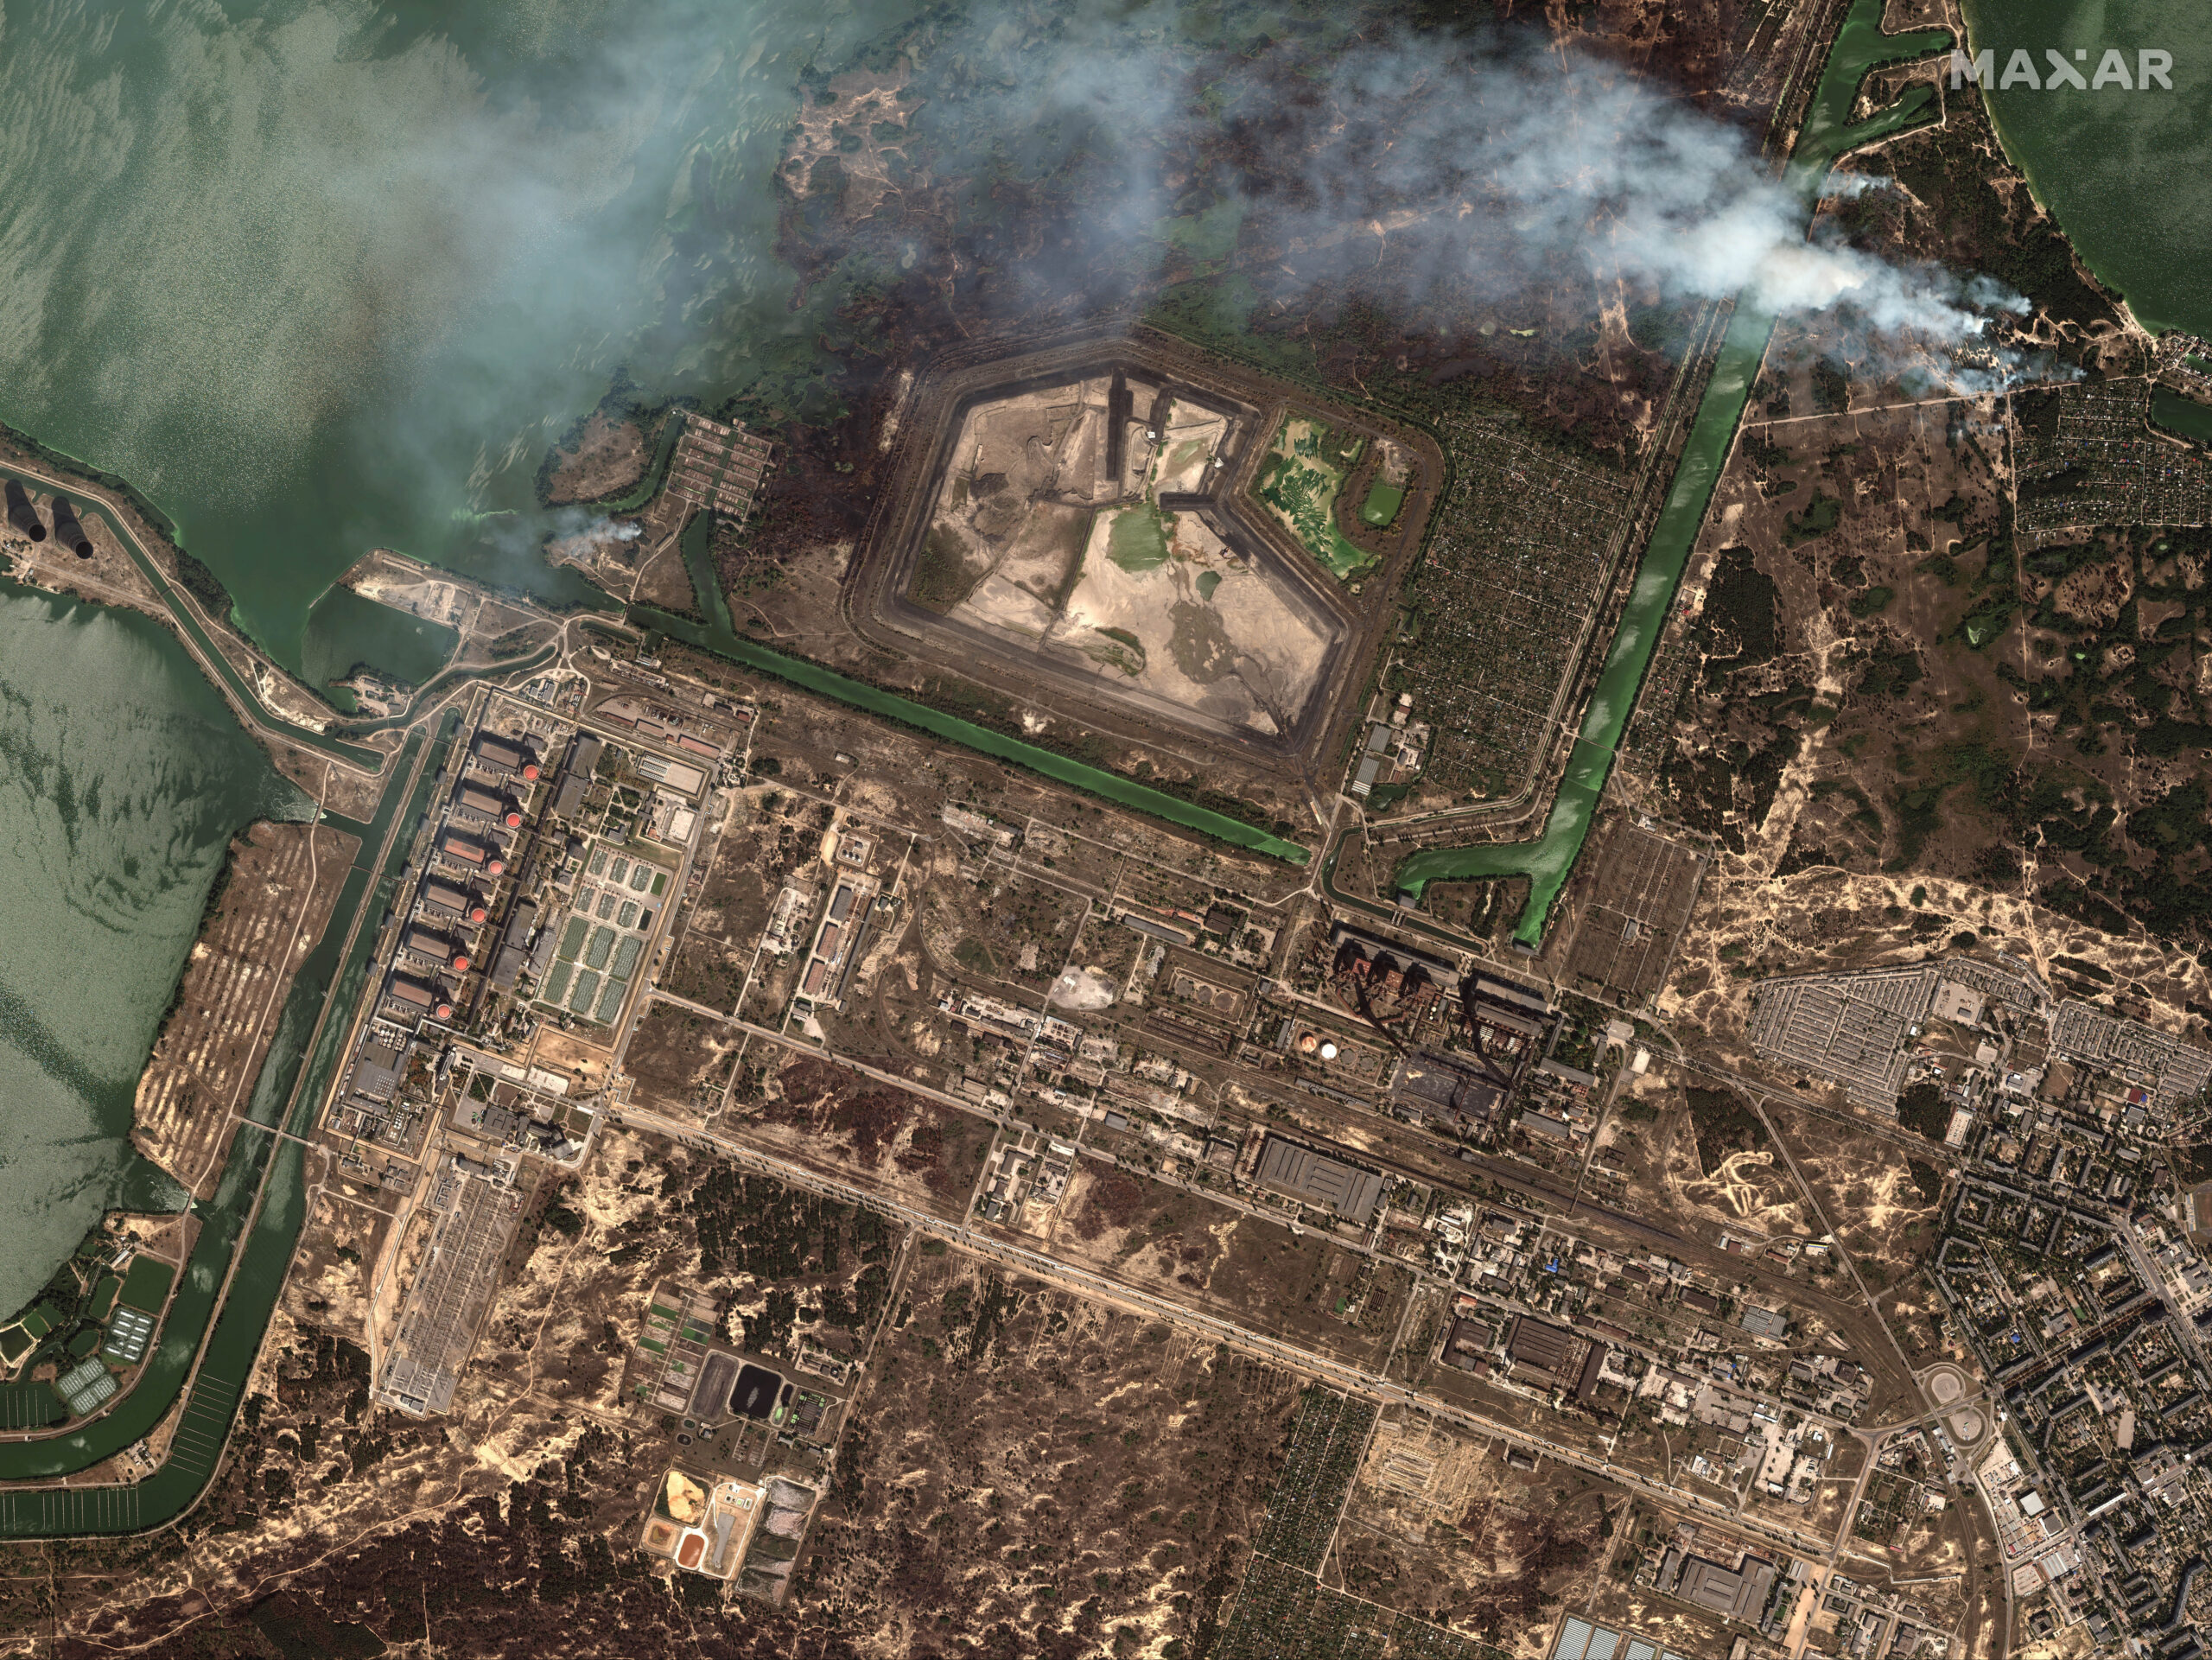 This satellite image provided by Maxar Technologies shows bush fires outside of the main power plant facilities at the Zaporizhzhia nuclear plant in Russian occupied Ukraine, Monday Aug. 29, 2022. A team from the U.N. nuclear watchdog on Monday started its journey to the Zaporizhzhia atomic power plant at the heart of fighting in Ukraine, a long-awaited mission to inspect crucial safety systems that the world hopes will help avoid a catastrophe. (Satellite image ©2022 Maxar Technologies via AP)